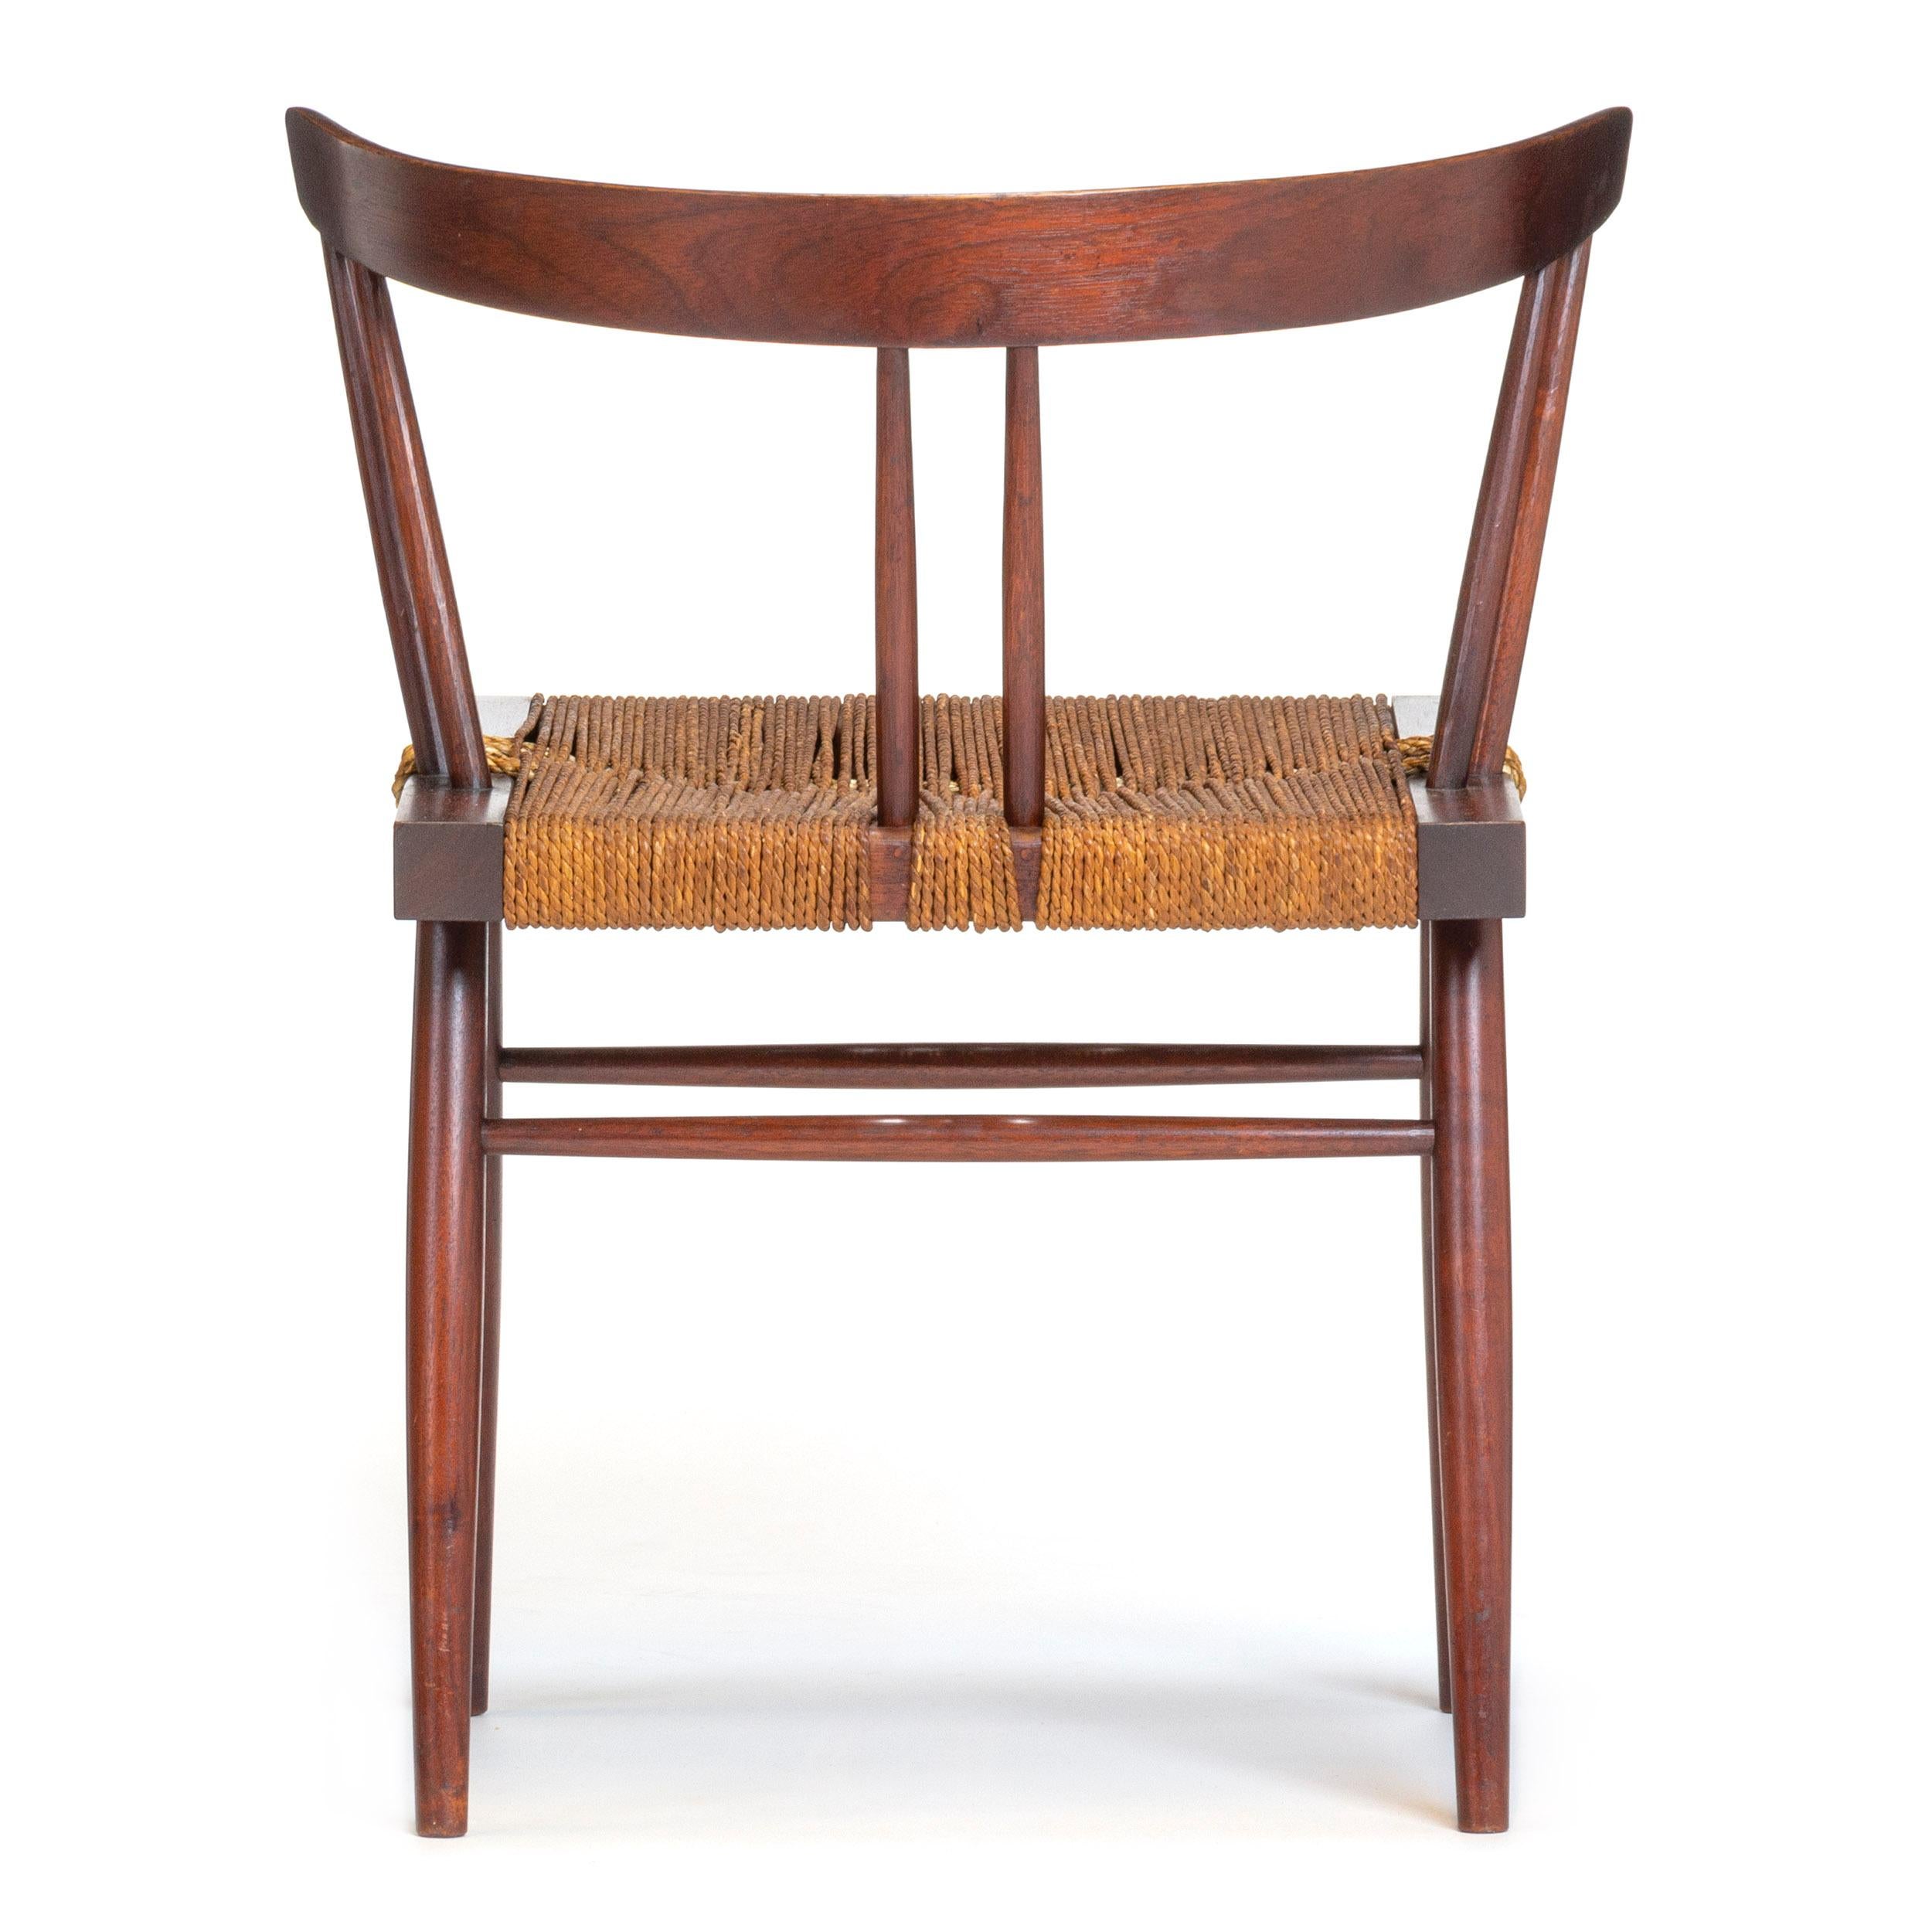 American Walnut Dining Chair or Side Chair by George Nakashima